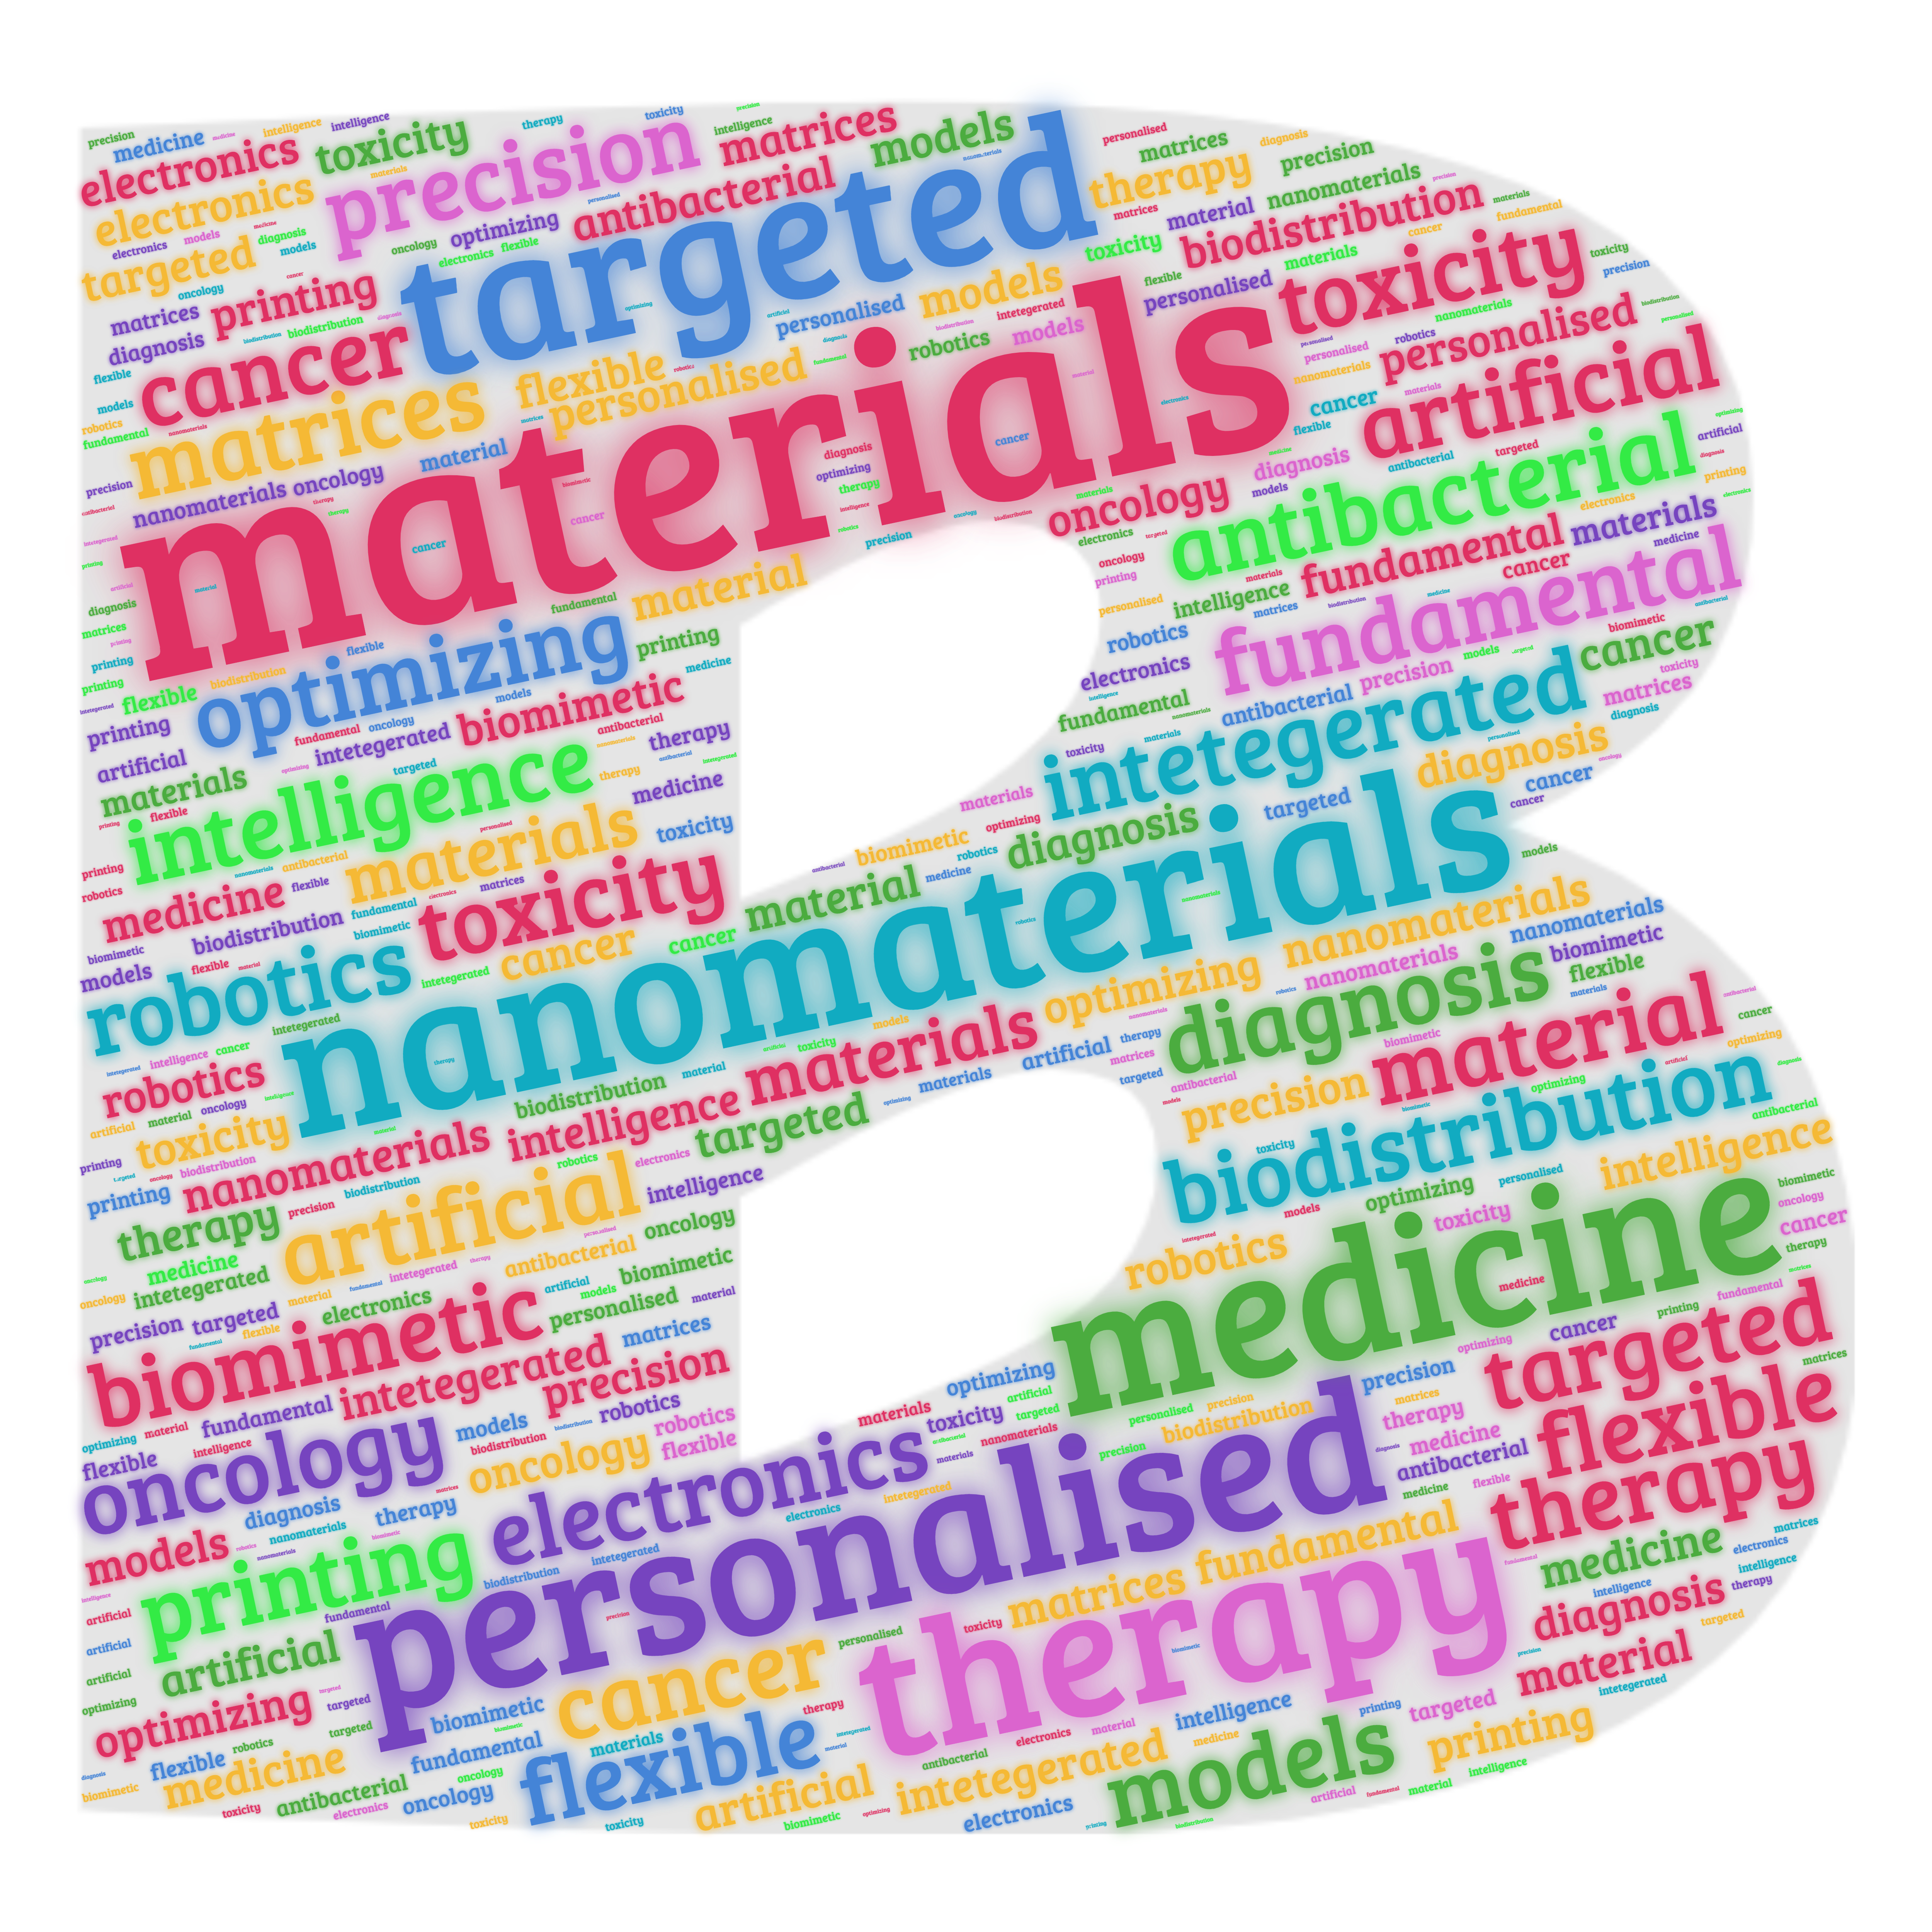 The letter 'B' filled with multicoloured words from survey responses. Materials, Nanomaterials, Personalised, Therapy, Electronics, Medicine, Targeted, Cancer, Precision.